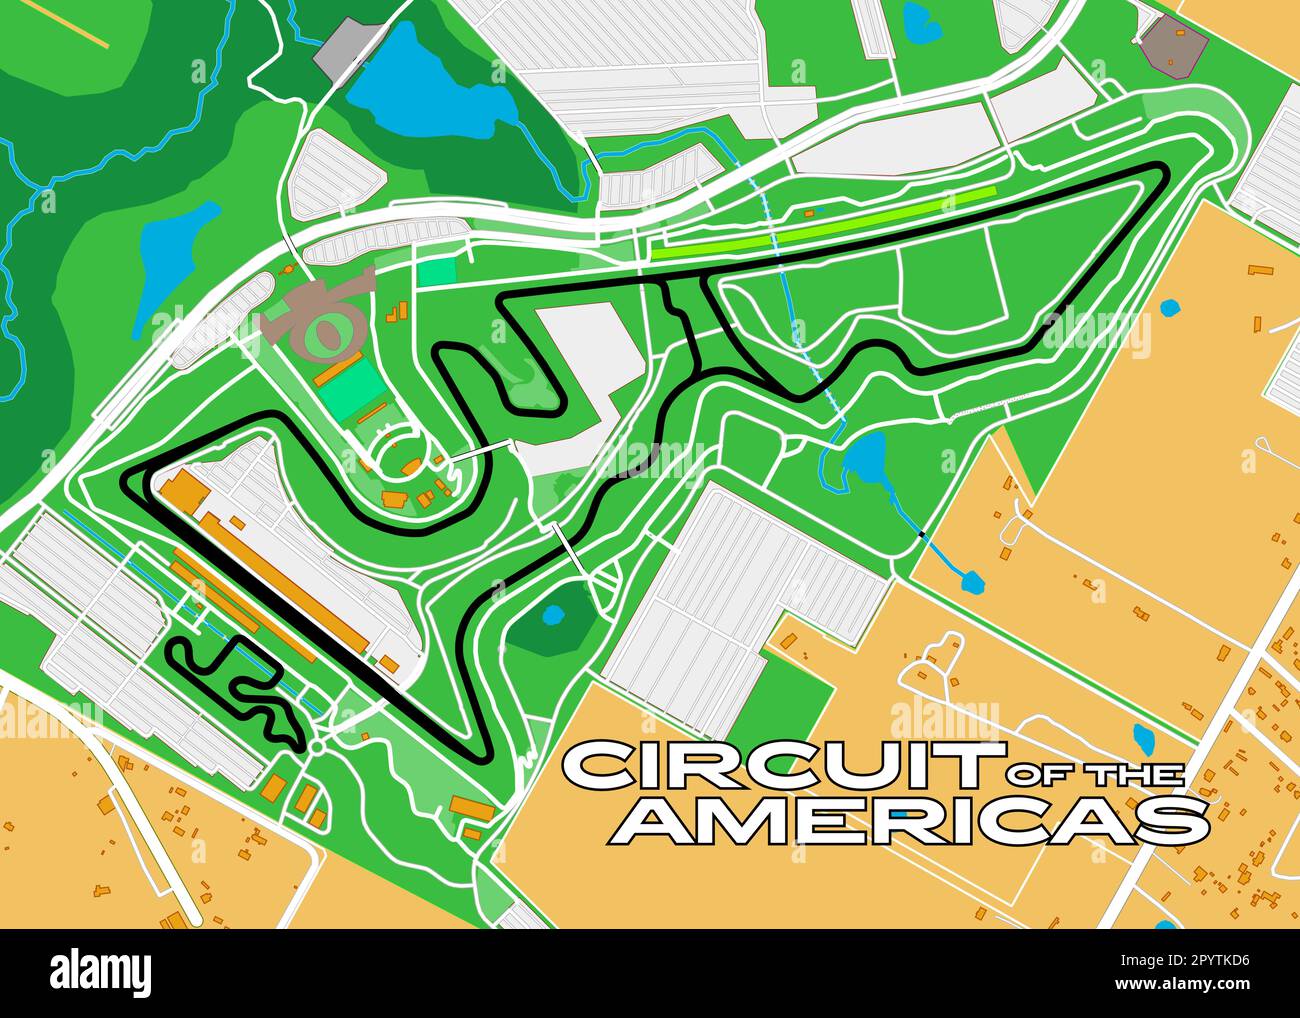 Circuit of the Americas poster art Stock Vector